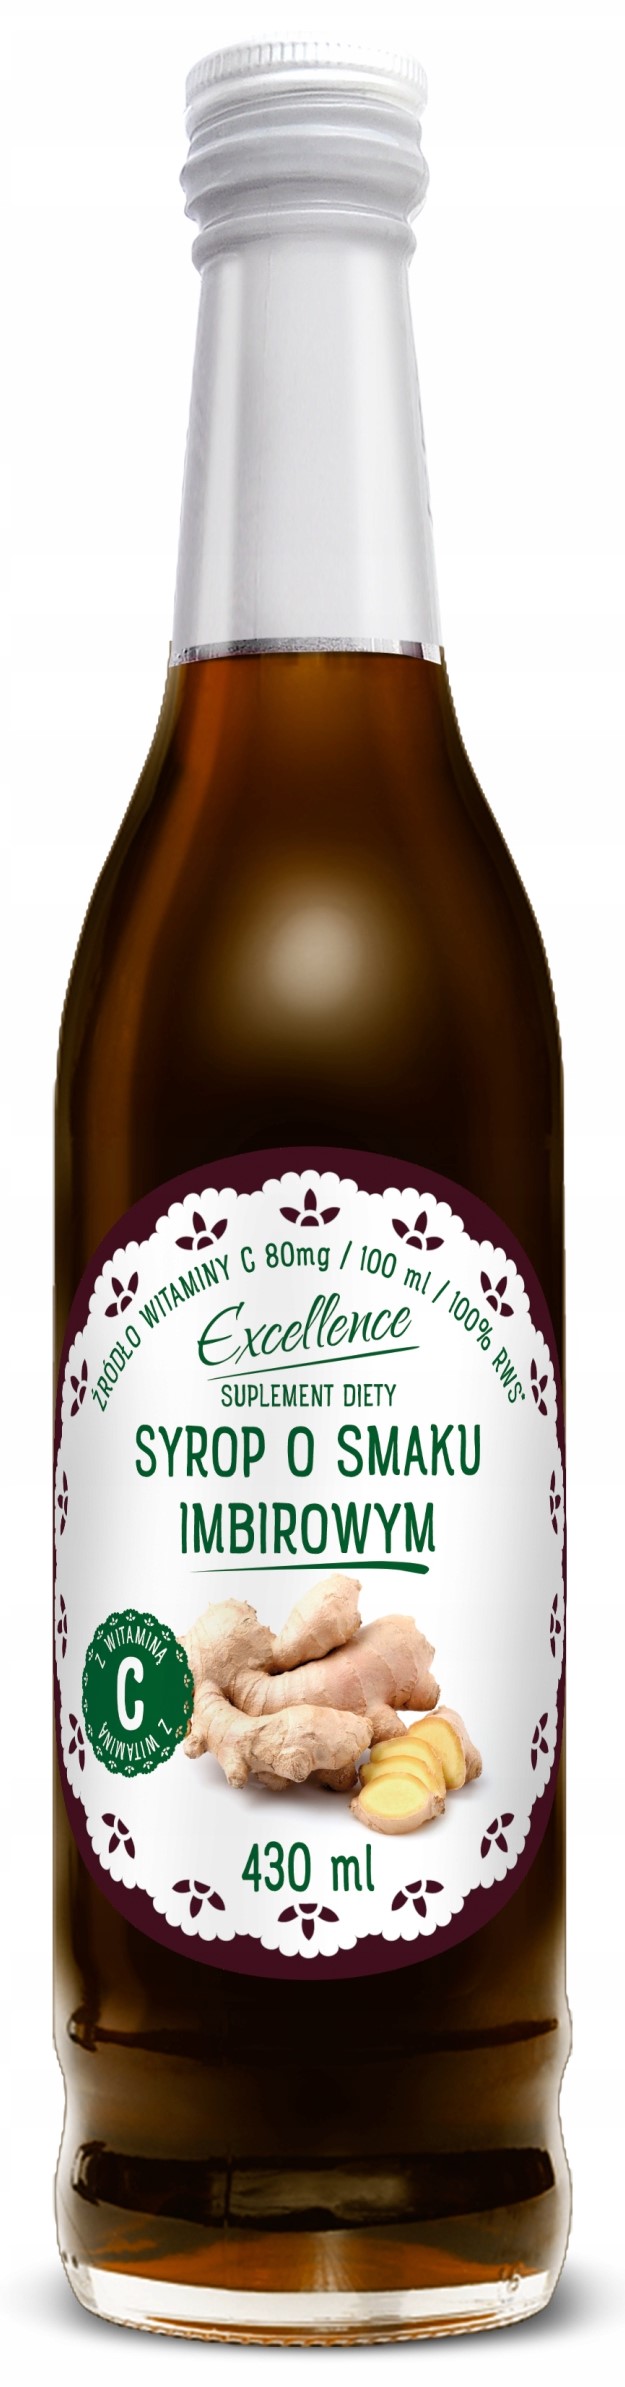 Excellence Syrop o smaku imbirowym